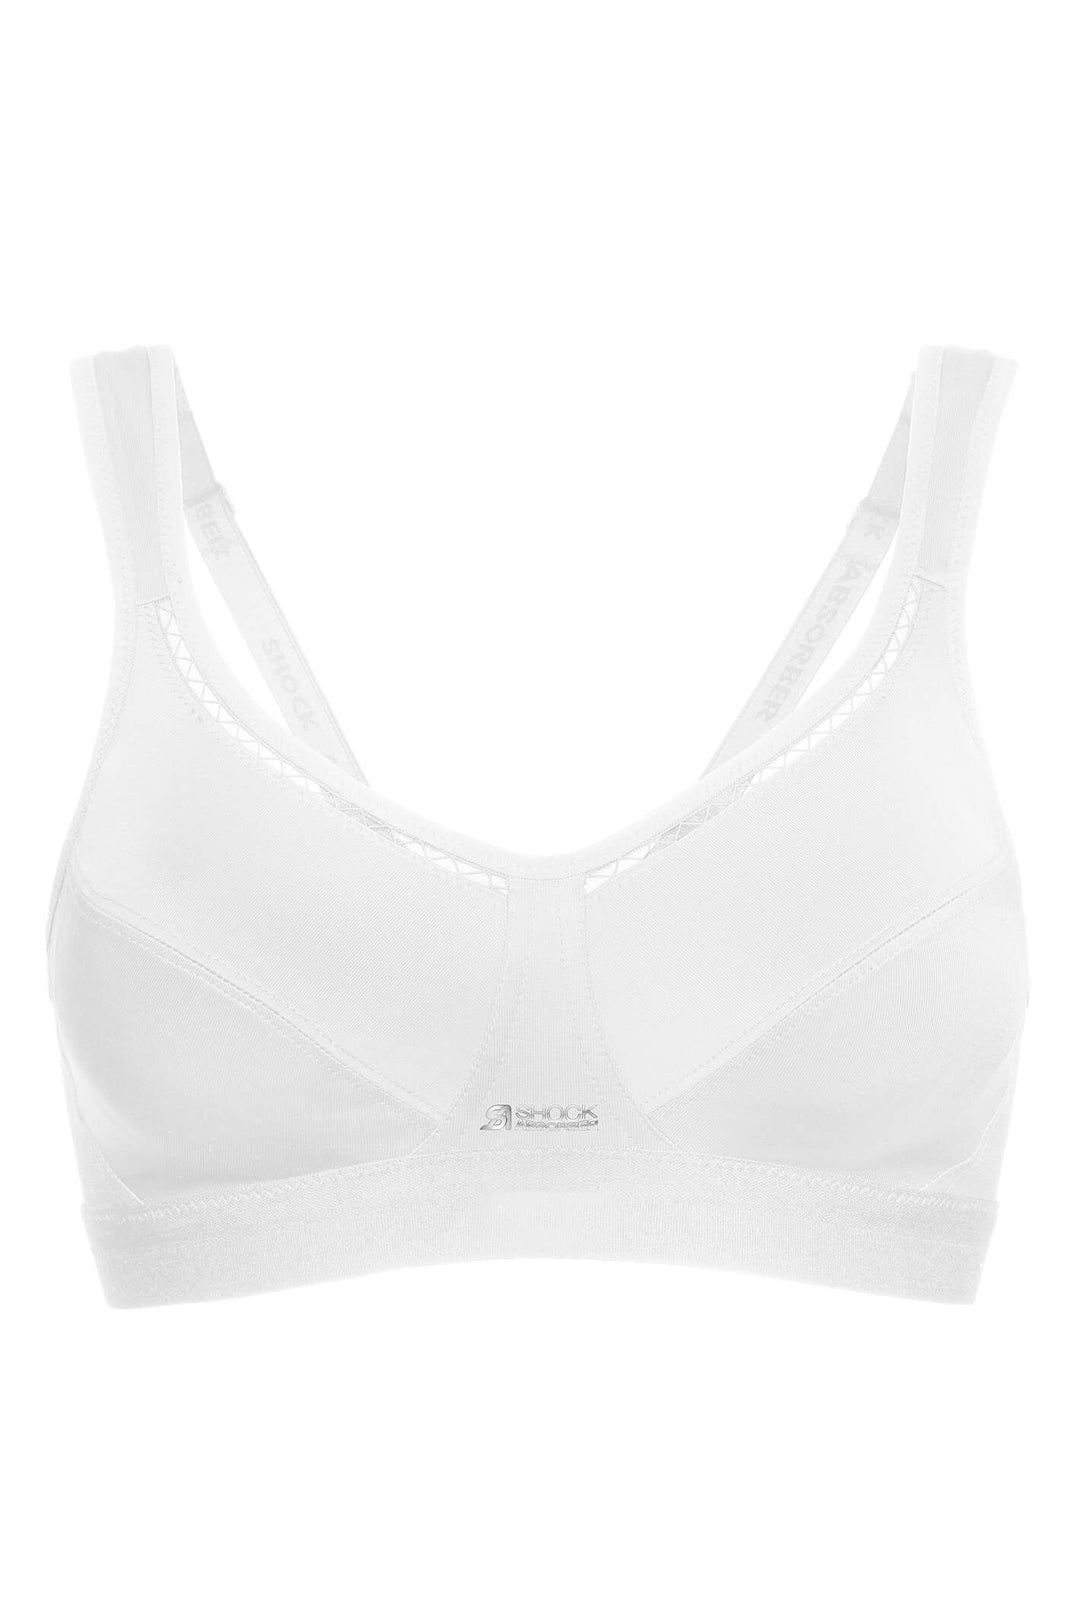 Shock Absorber SN102 White Active Classic Support Sports Bra - Shirley Allum Boutique